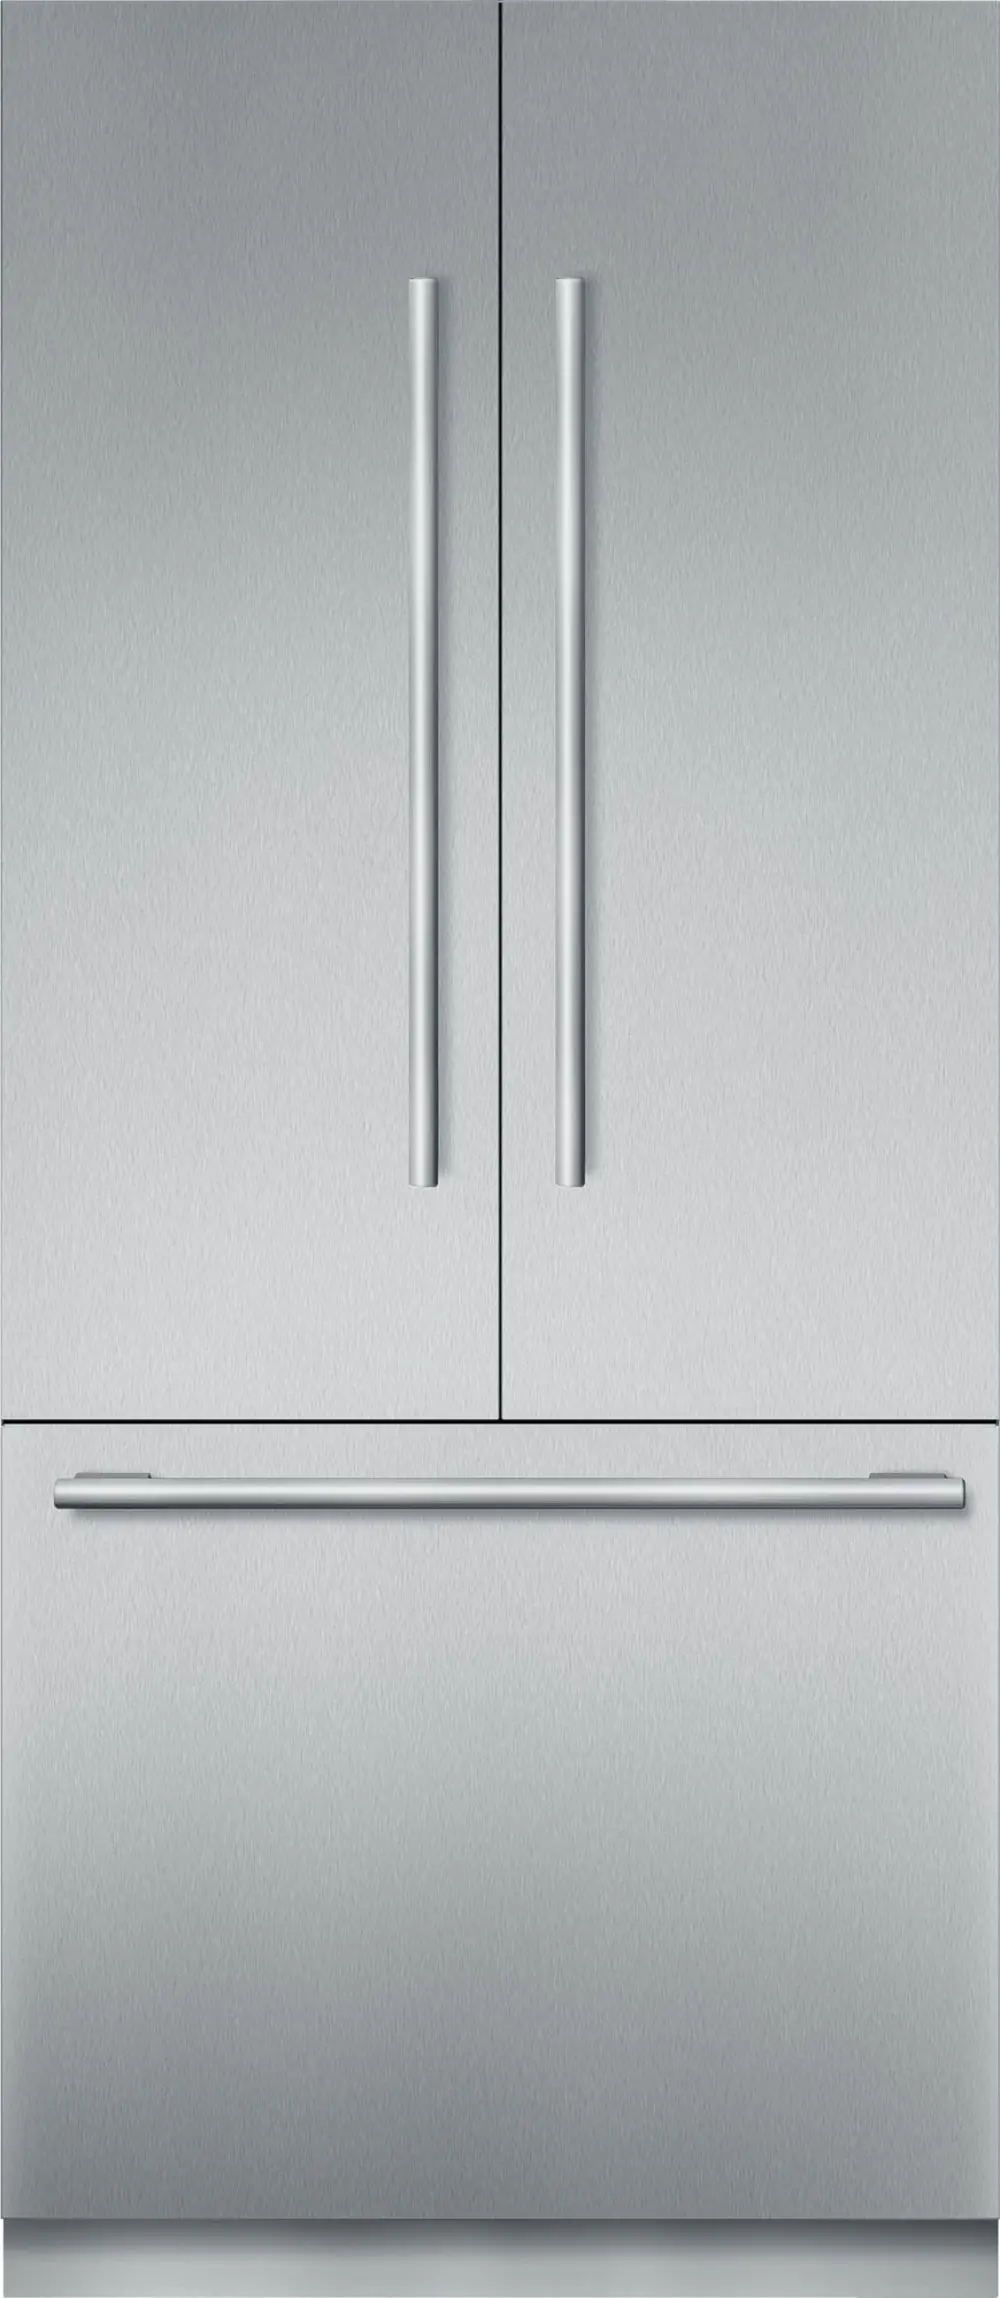 T36IT902NP Thermador 36 Inch French Door Refrigerator - Panel Ready, 19.4 cu. ft., T36IT902NP-1